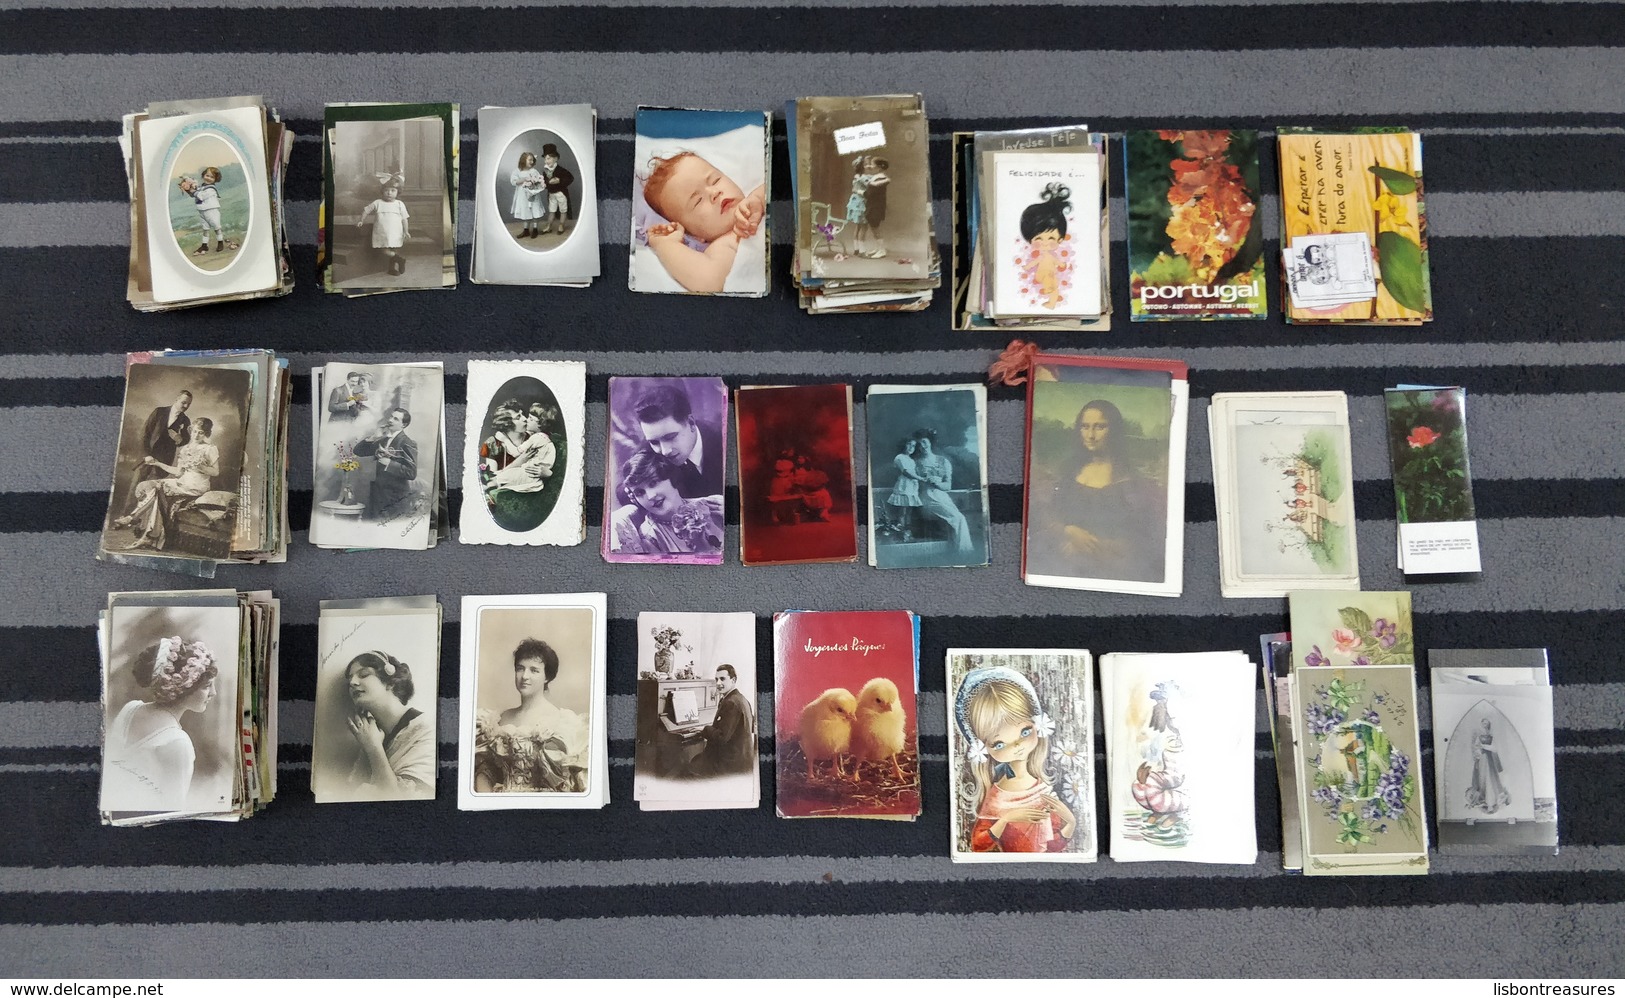 ANTIQUE HUGE LOT X 880 POSTCARDS + 5 BOOK MARKERS WITH COUPLES, WOMEN, MAN, CHILDREN, ANIMALS ILLUSTRATIONS ETC - 500 CP Min.